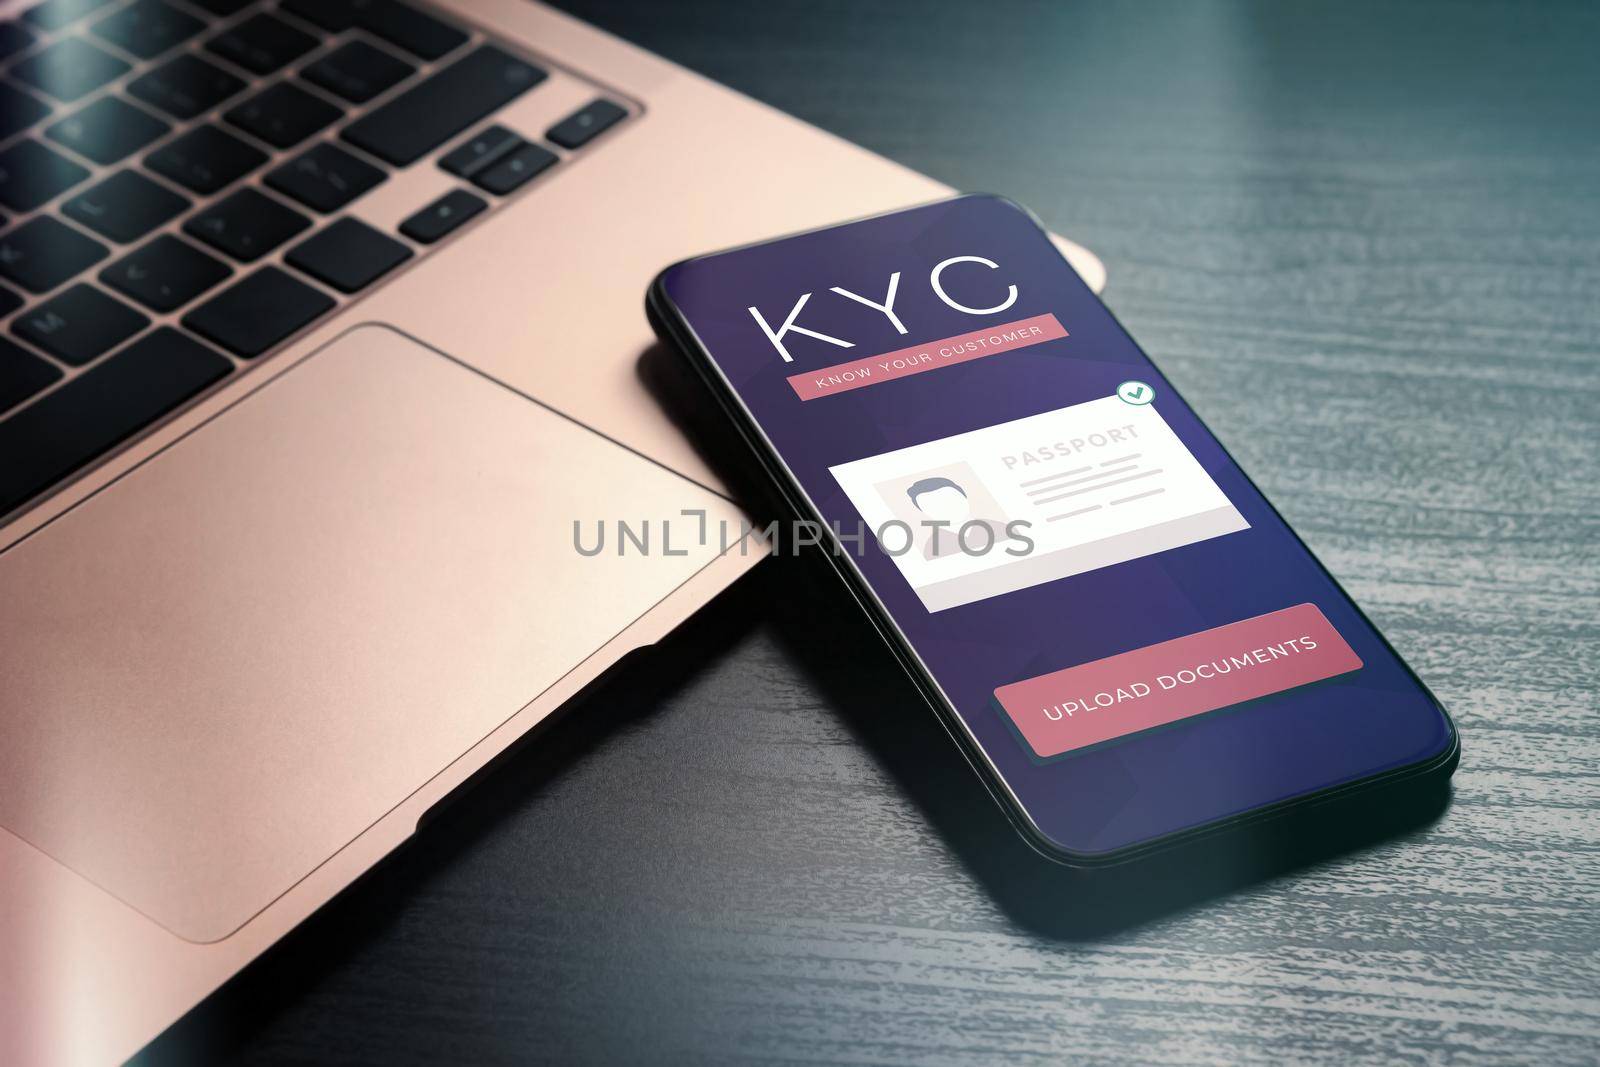 Know your client - KYC form on mobile phone. Application form for uploading documents for client identity and verification. Electronic eKYC fraud risks management, AML anti-money laundering concept.